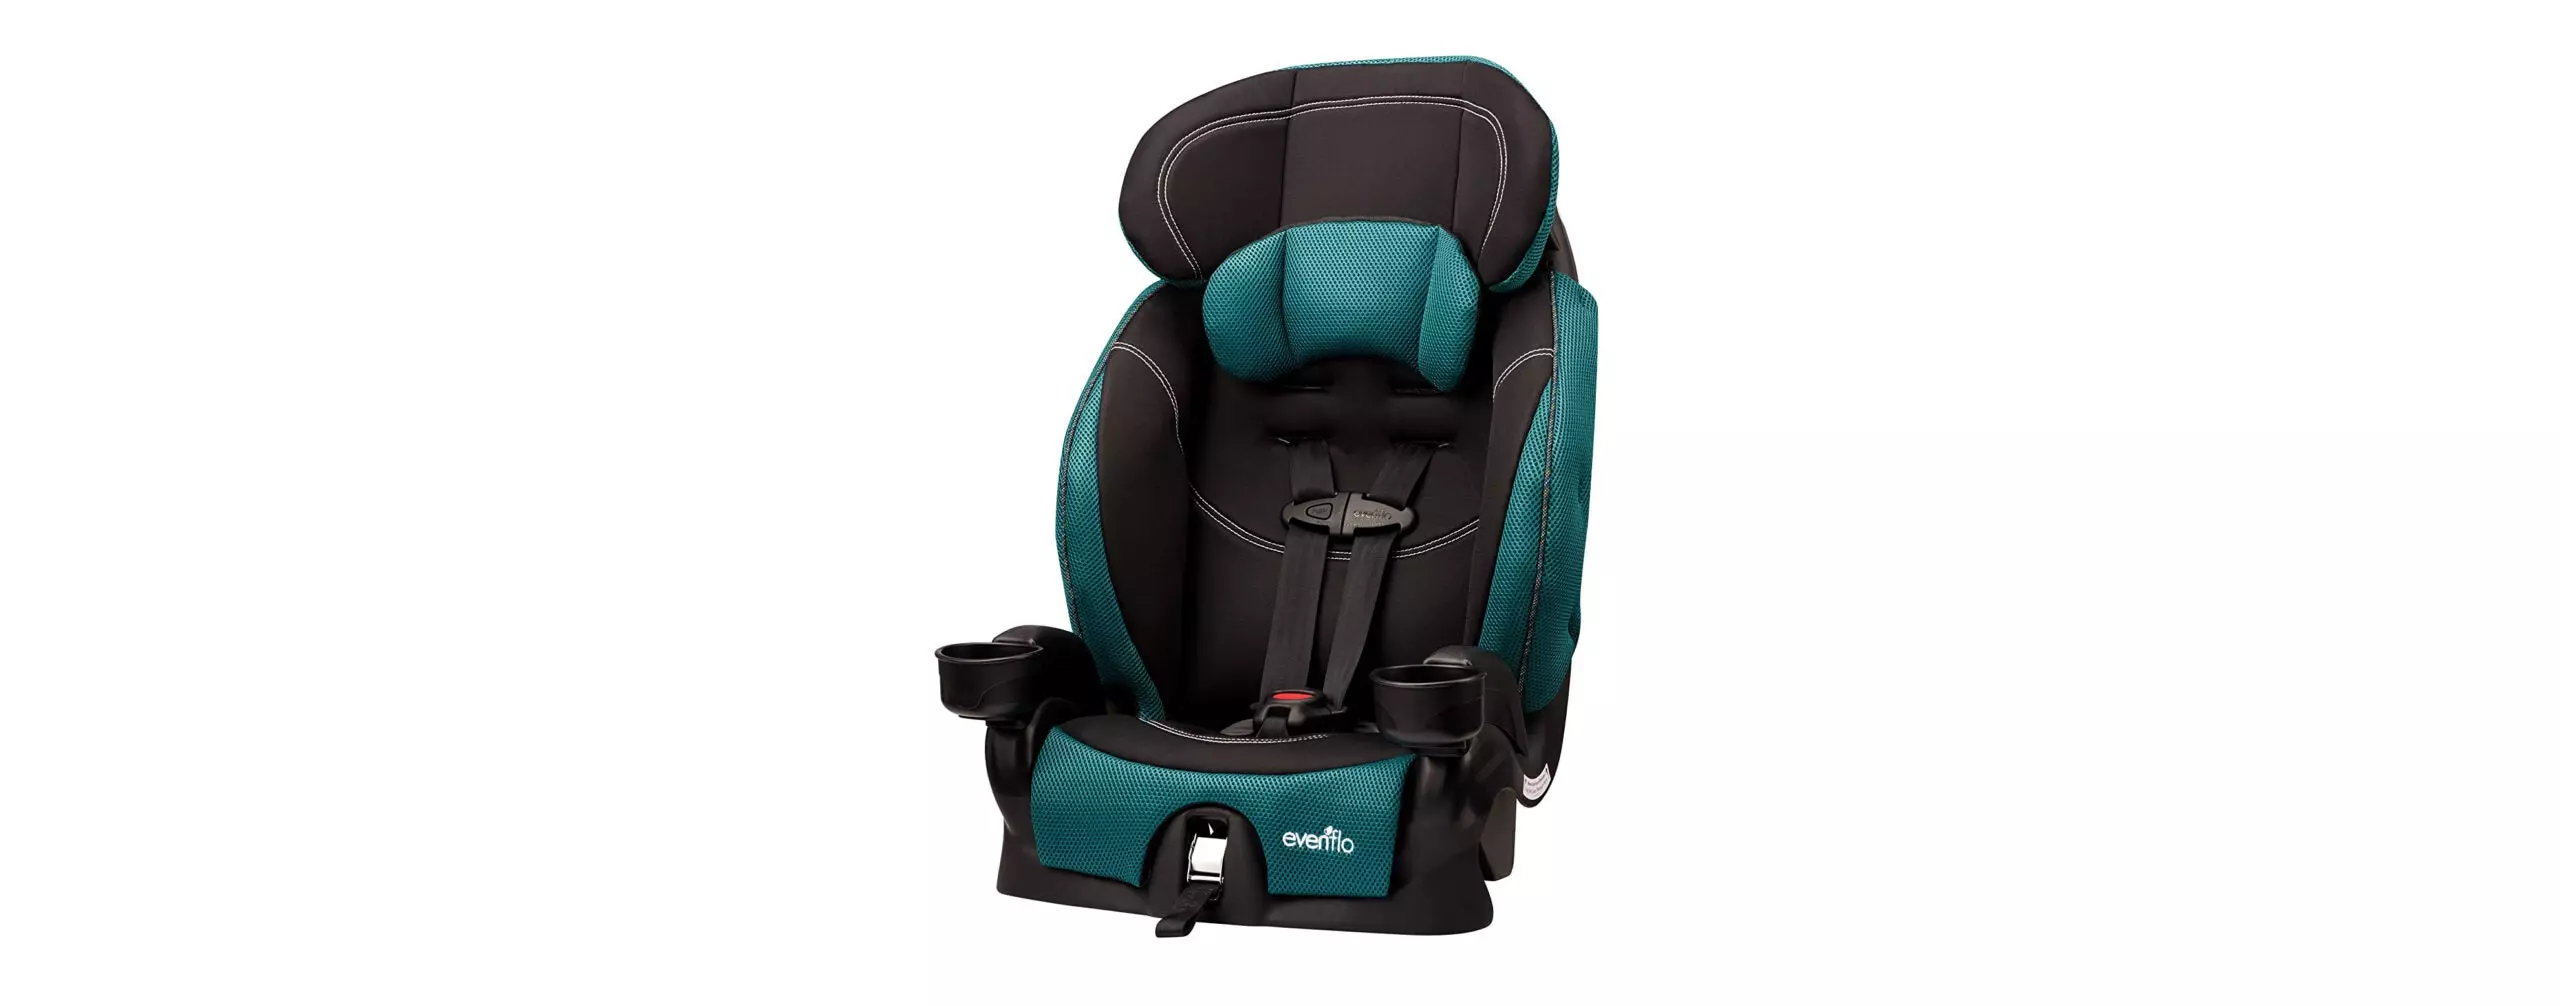 The Best Car Seat For 3-Year-Olds (Review and Buying Guide) in 2022